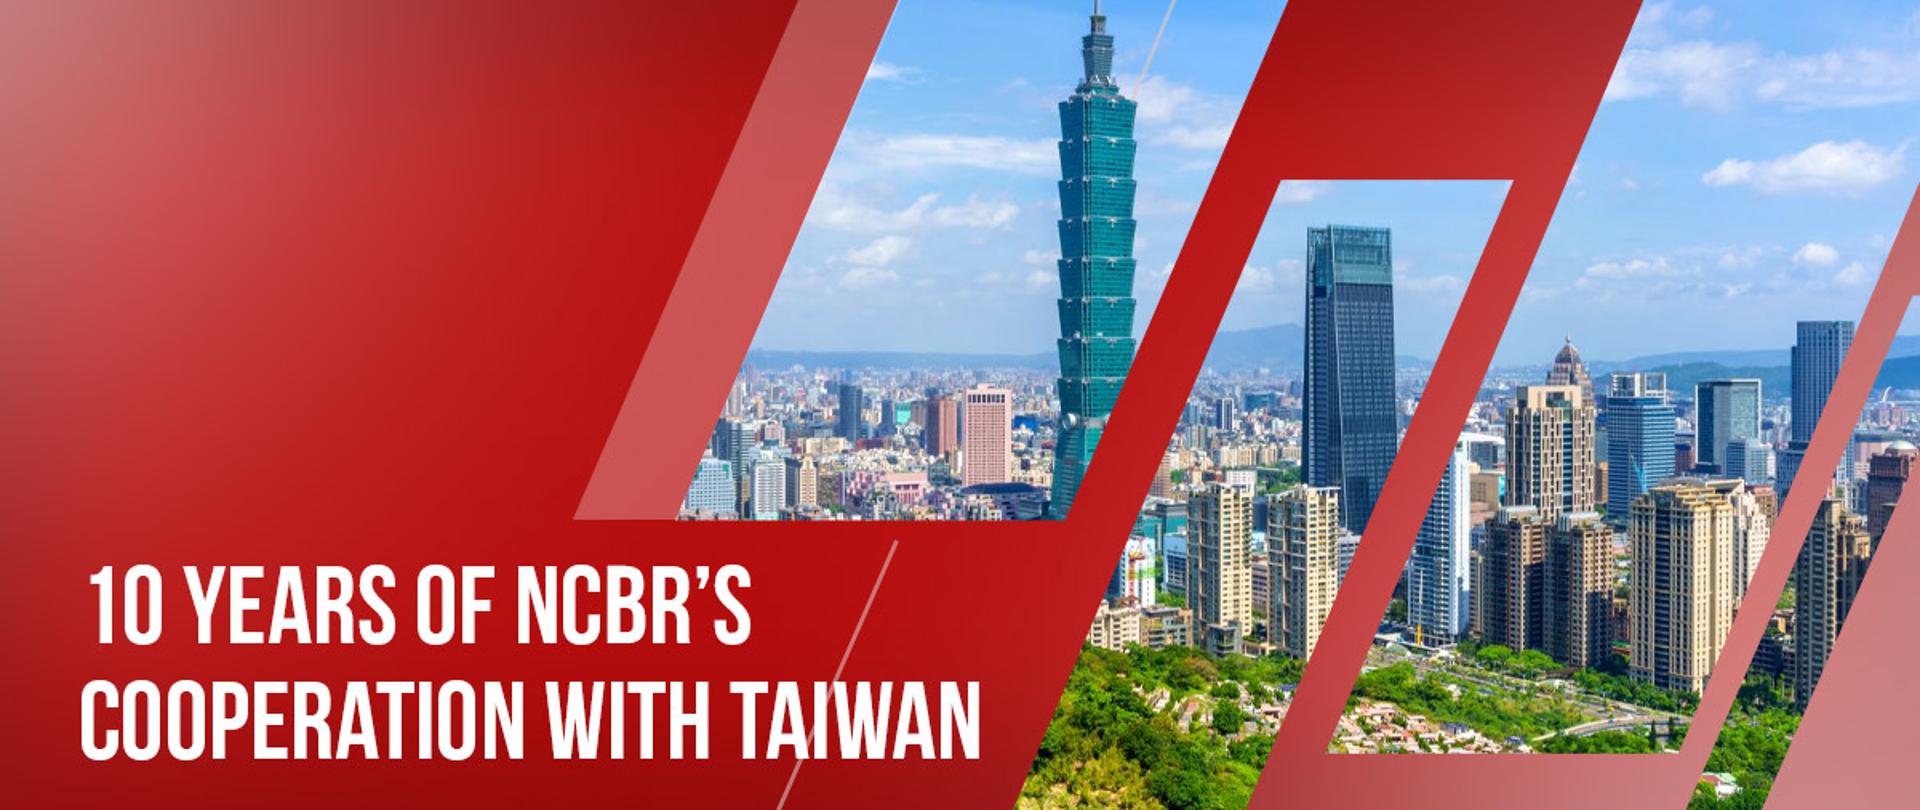 10 years of NCBR’s cooperation with Taiwan